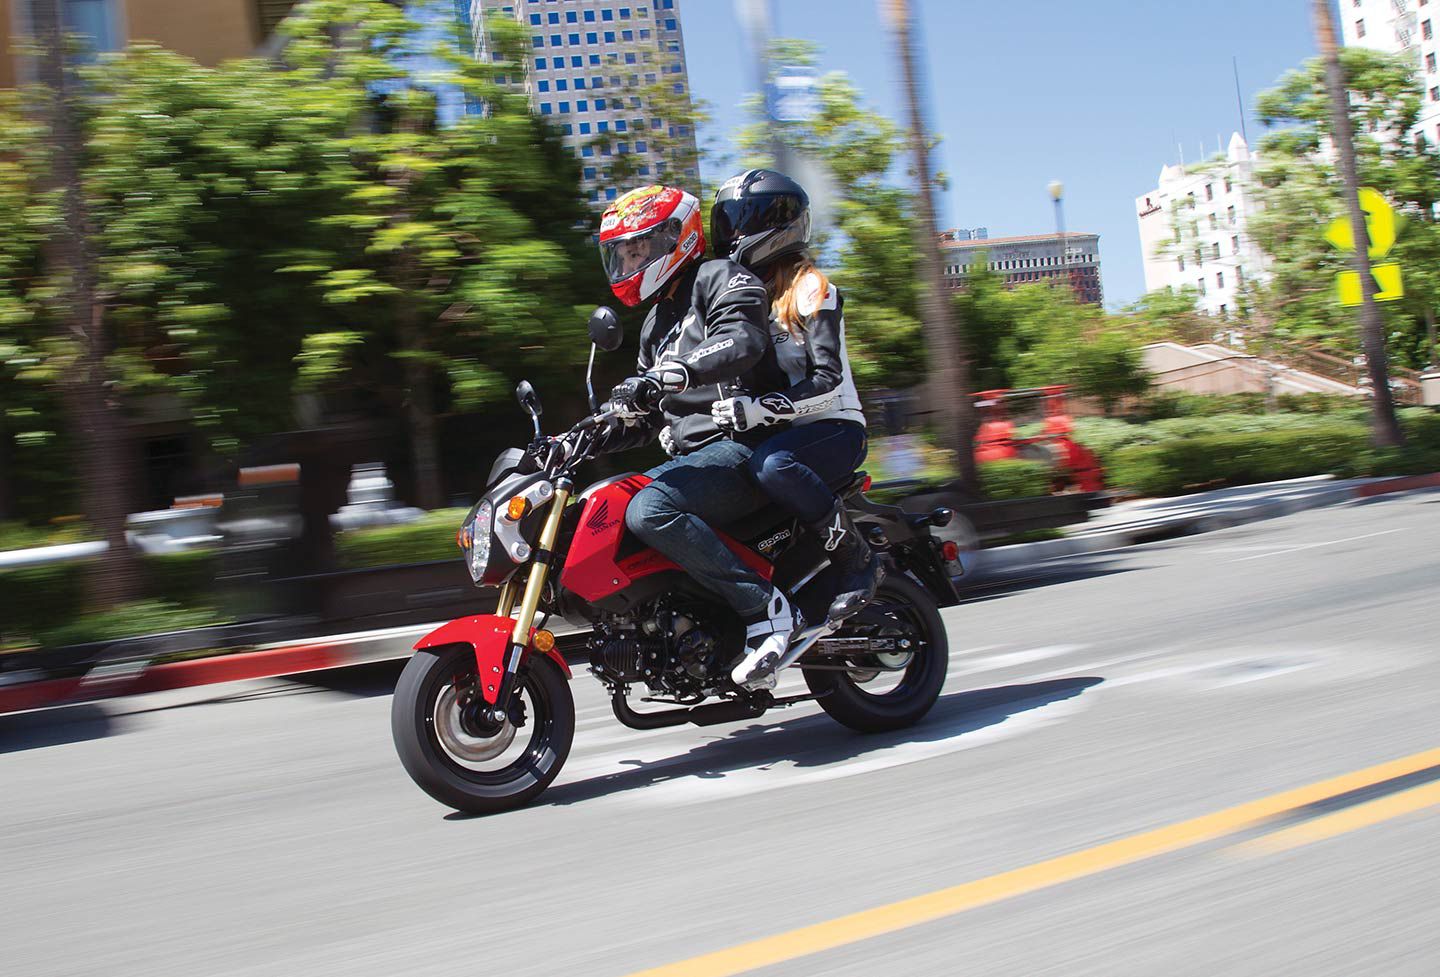 When the Grom debuted in 2014, its small size created a lot of interest.